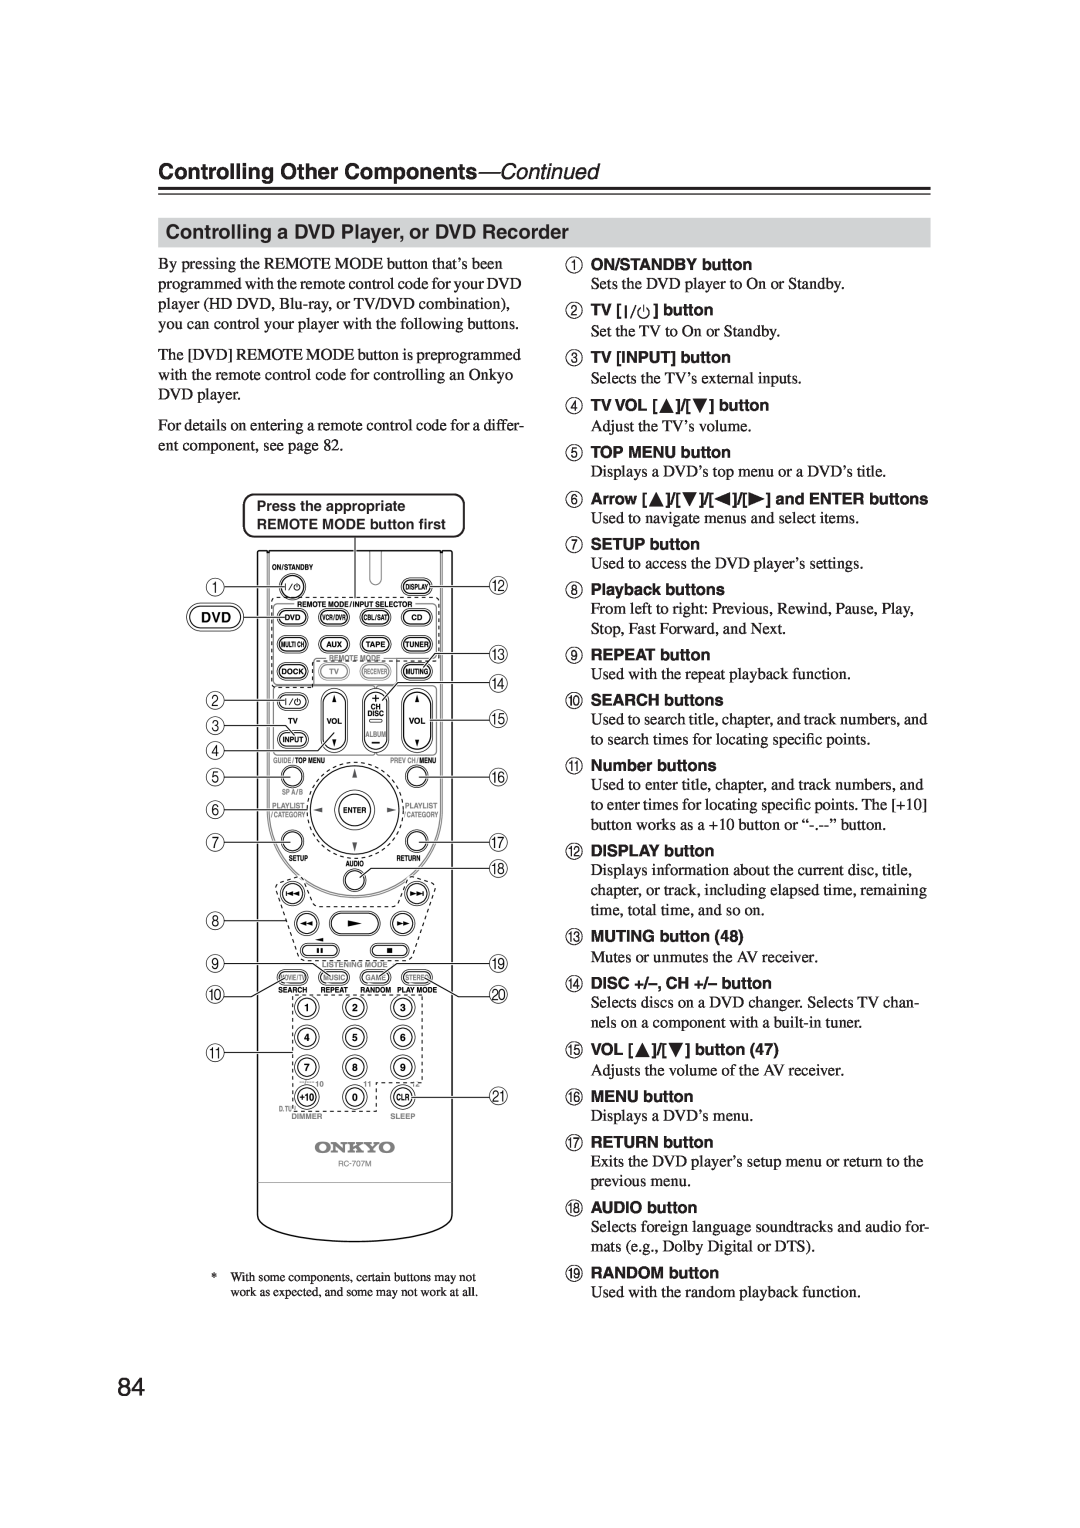 Onkyo S5100 instruction manual Controlling a DVD Player, or DVD Recorder, Controlling Other Components—Continued 